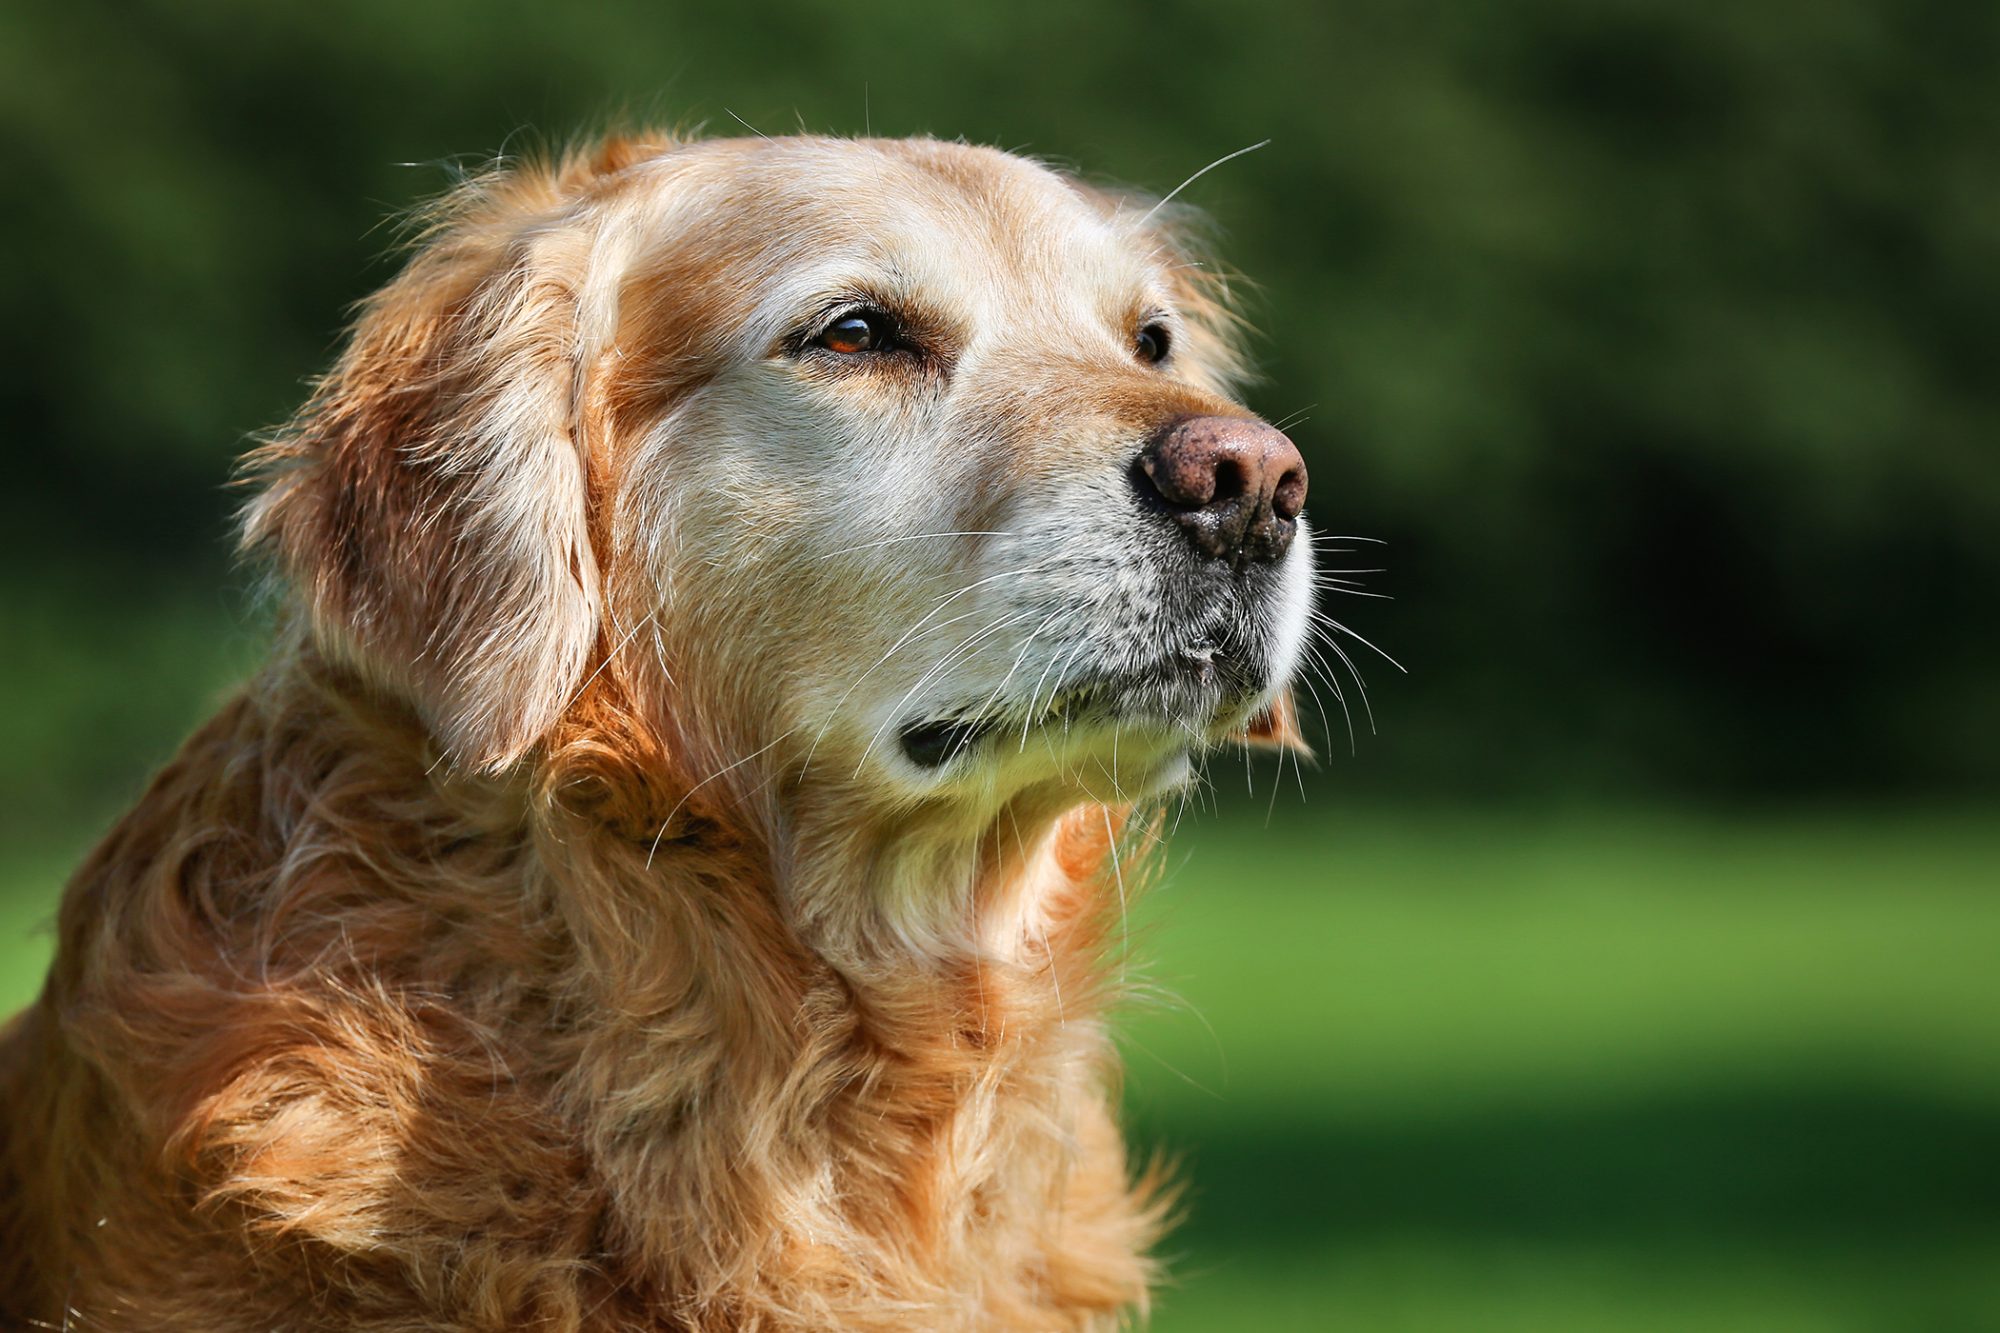 Do dogs know when they are about to die?